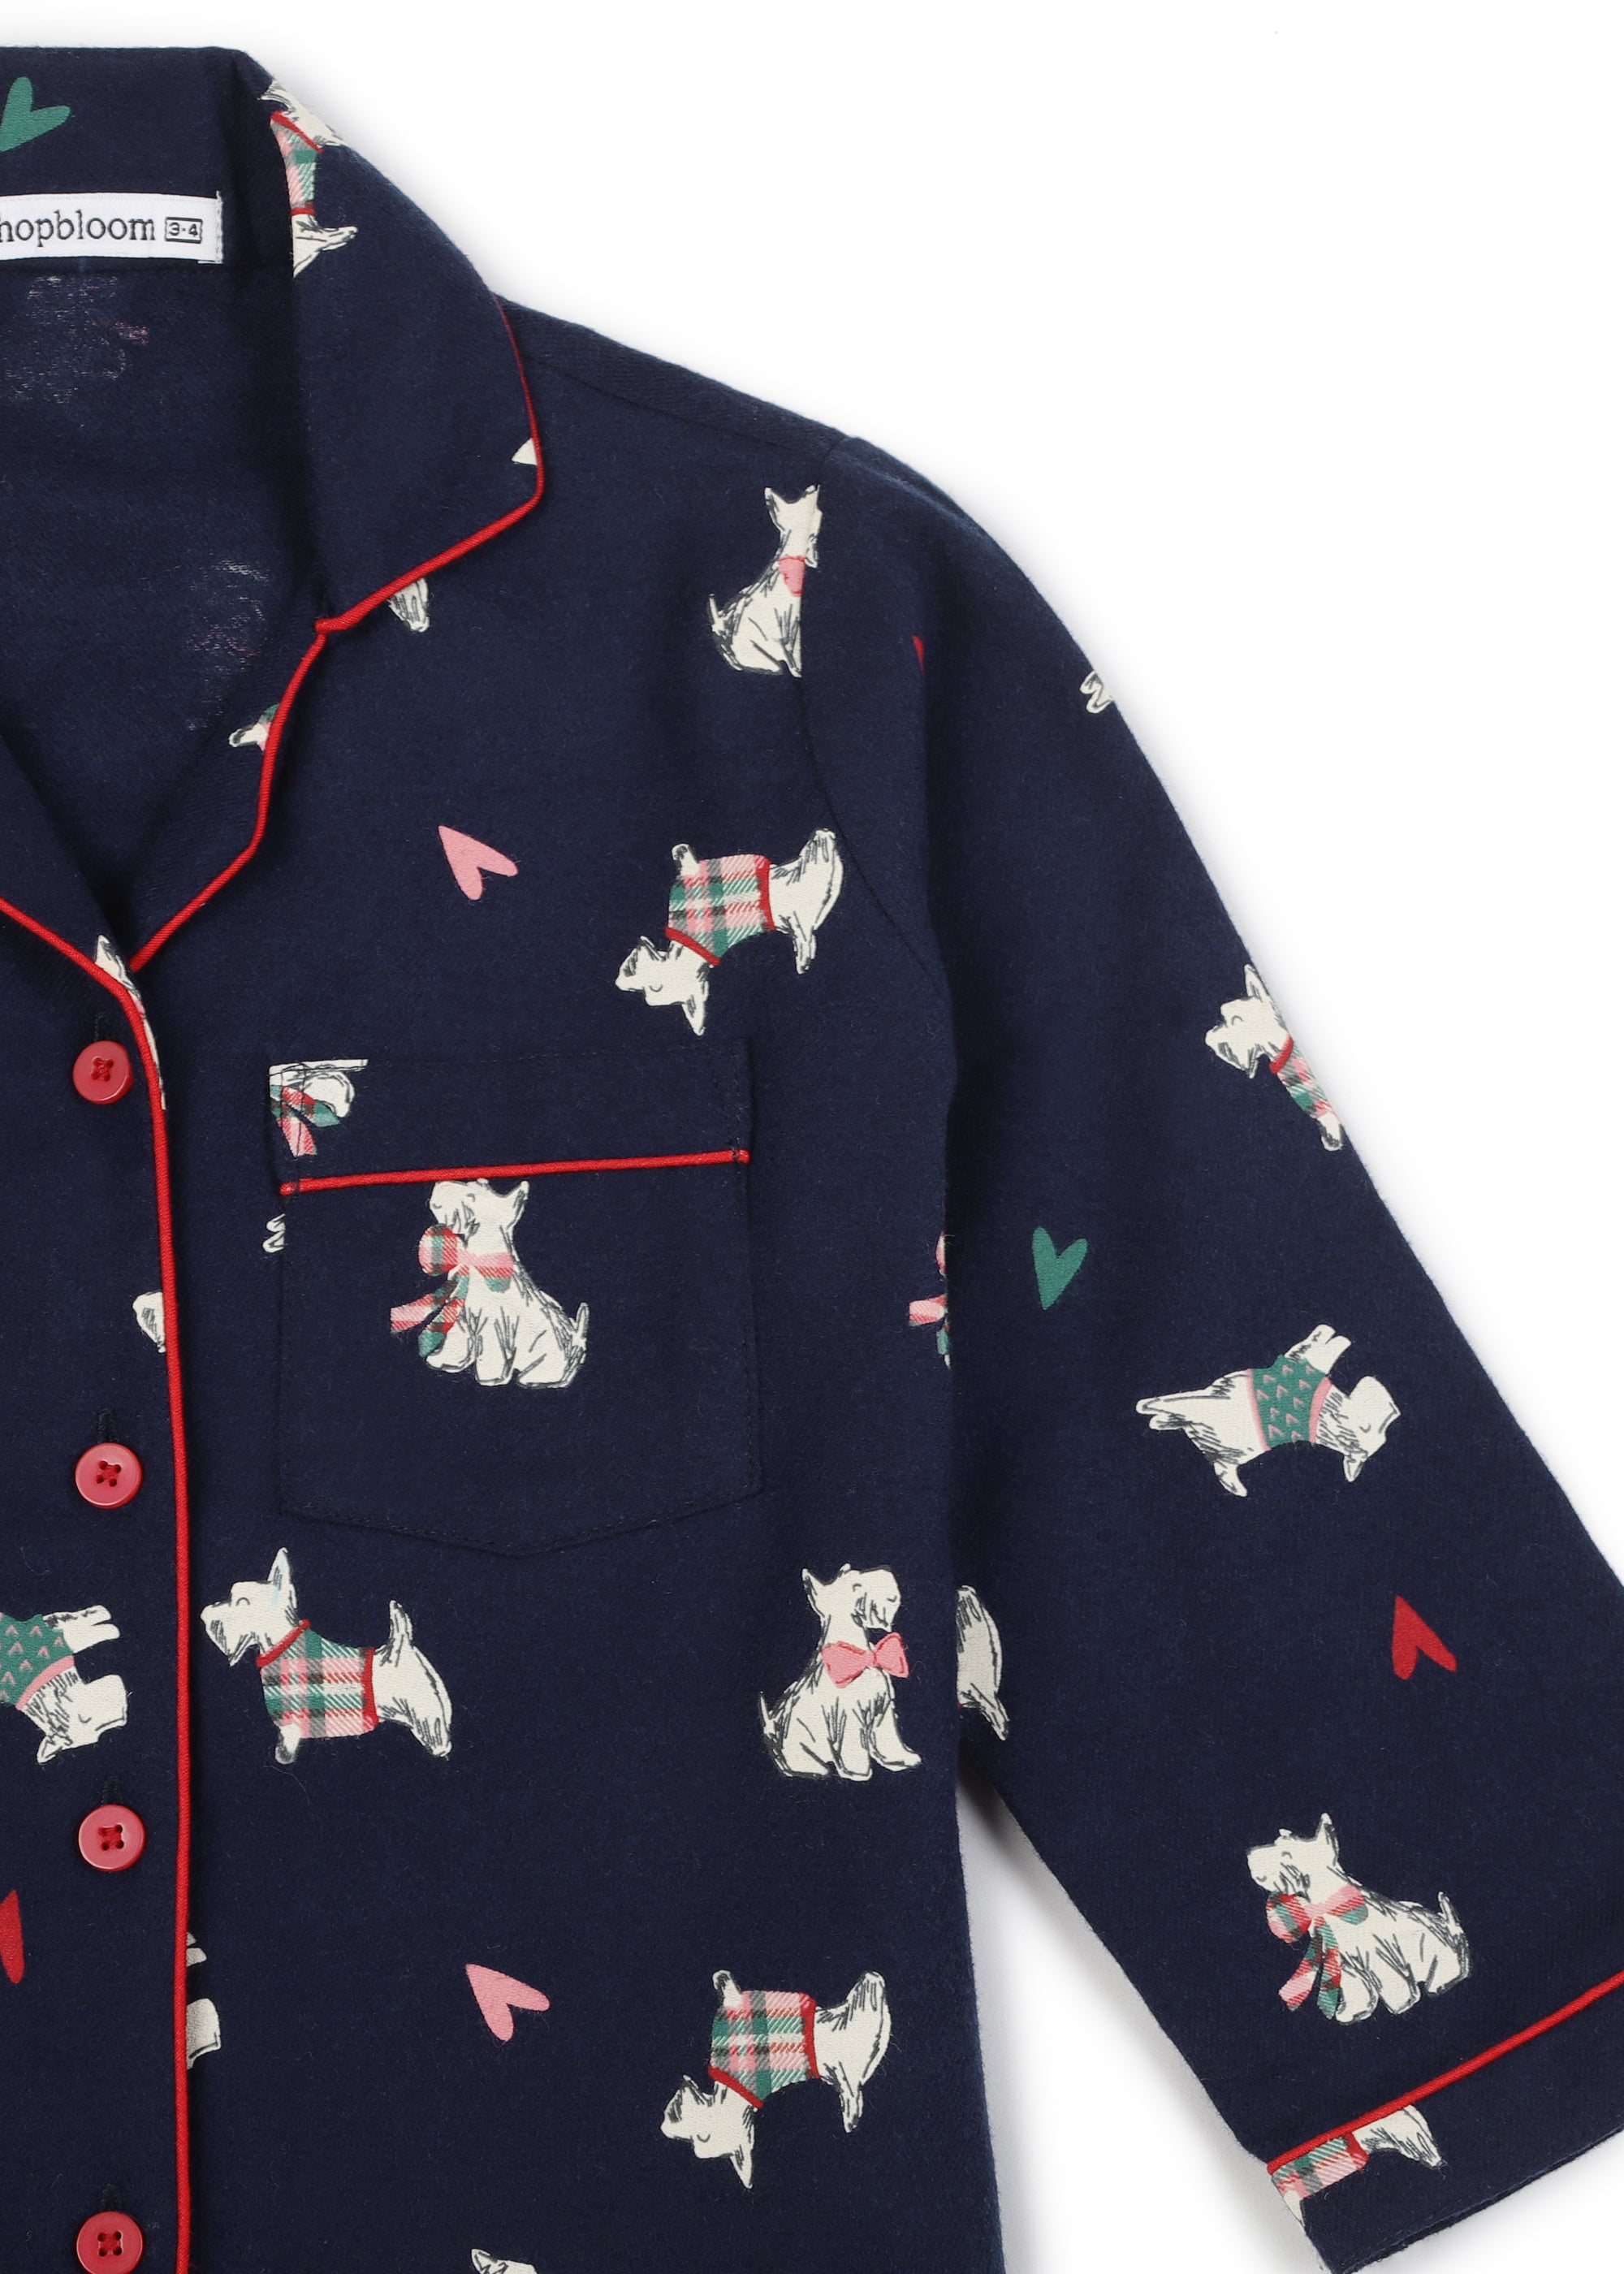 Cute Dogs Print Cotton Flannel Long Sleeve Kid's Night Suit